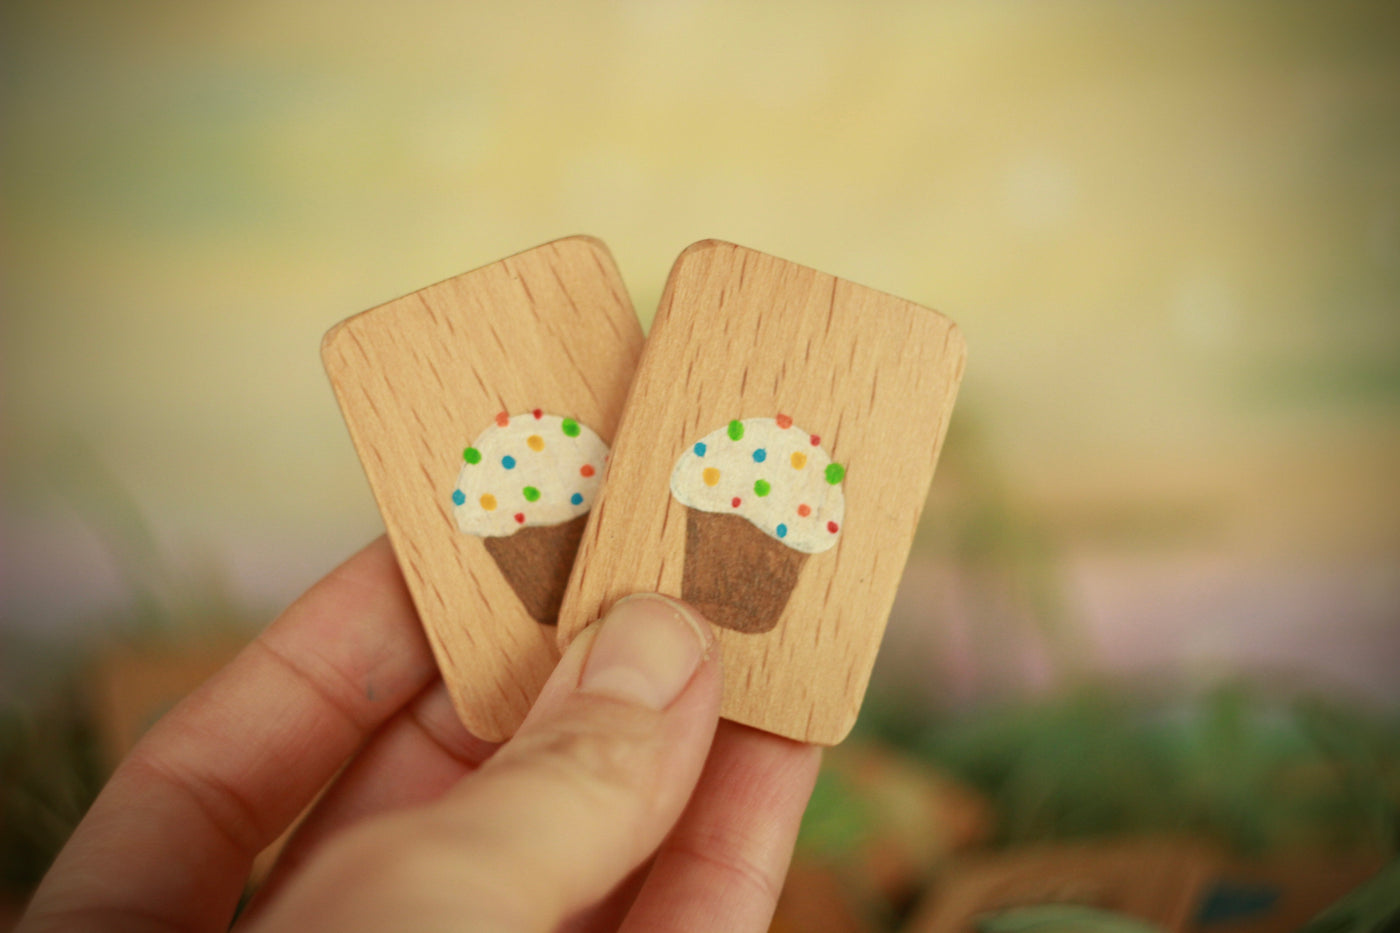 Wooden Memory Game